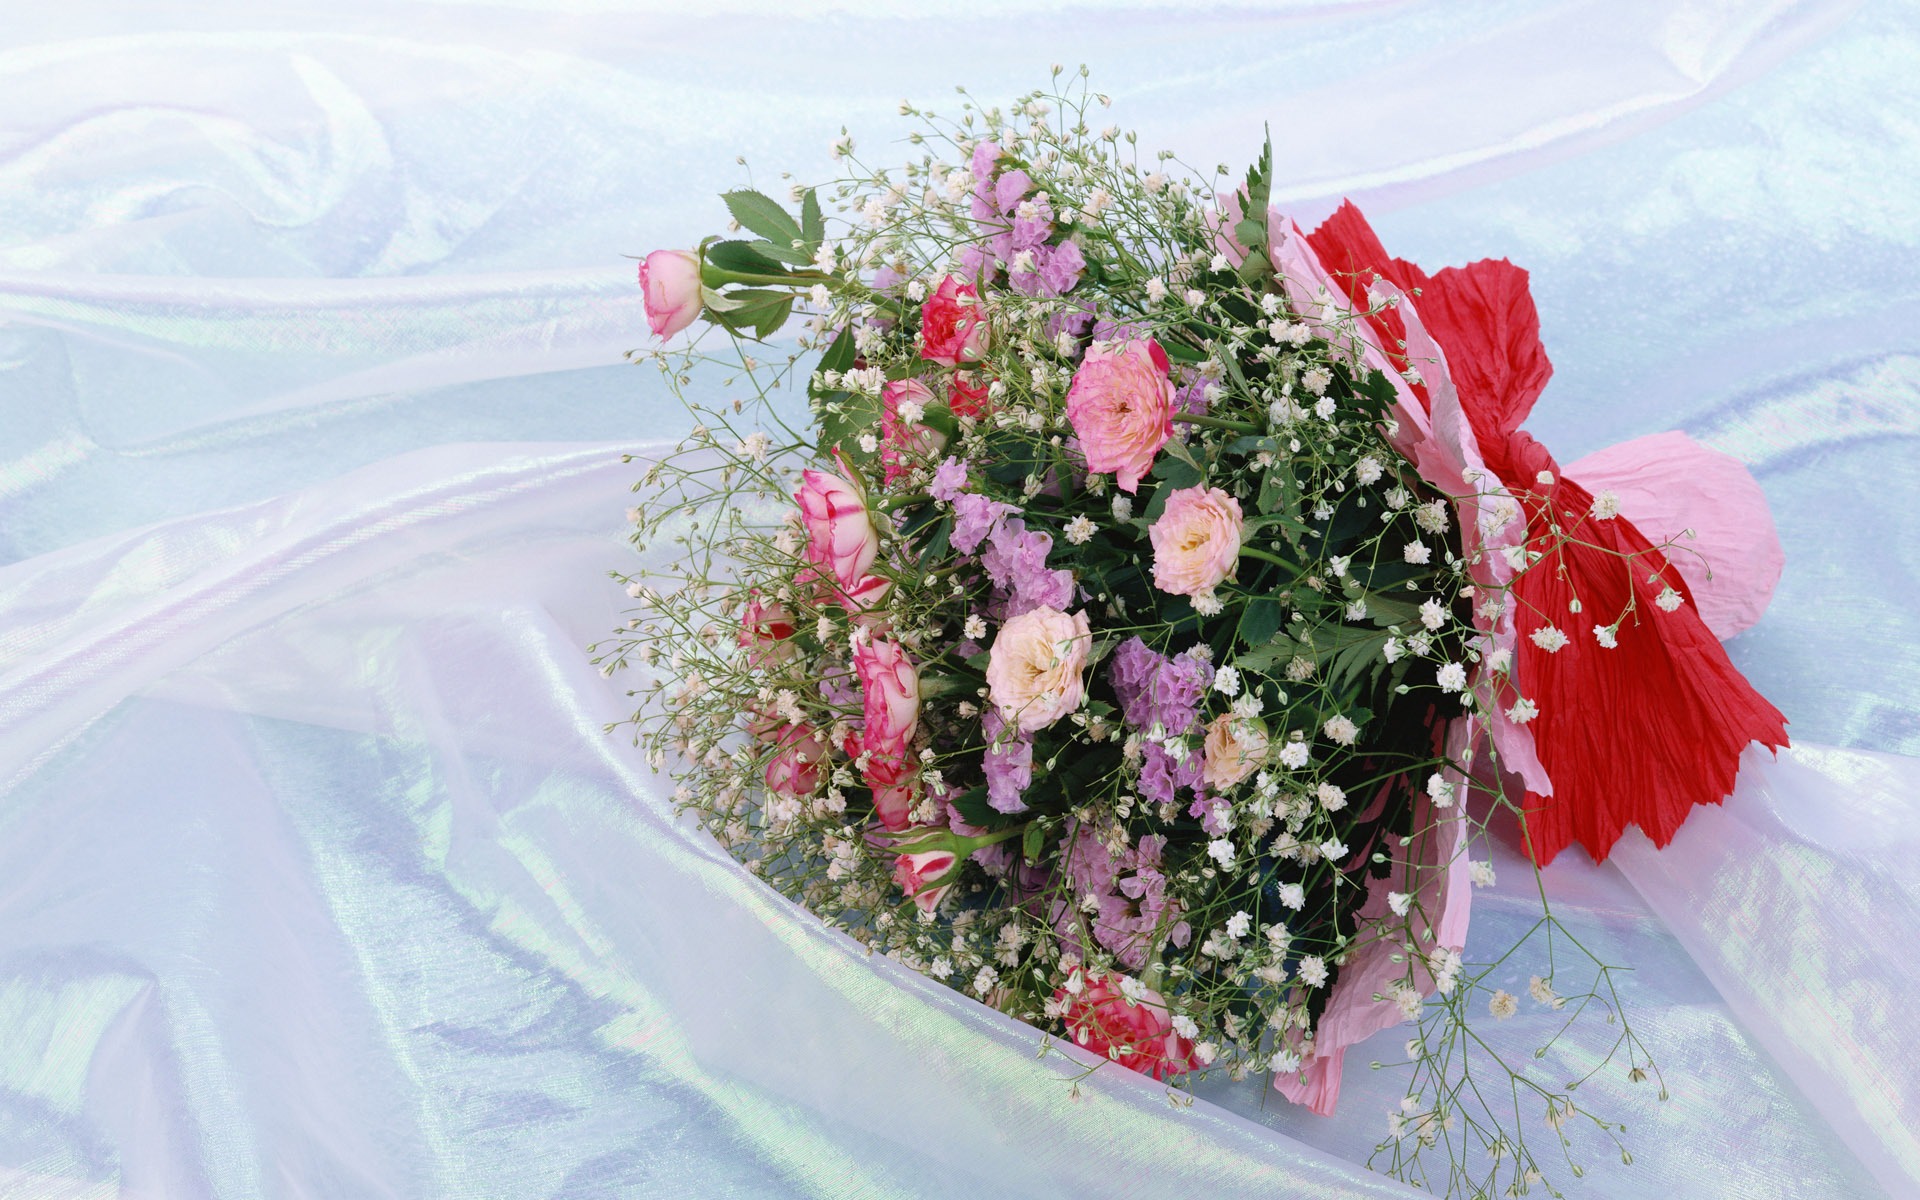 Weddings and Flowers wallpaper (2) #14 - 1920x1200